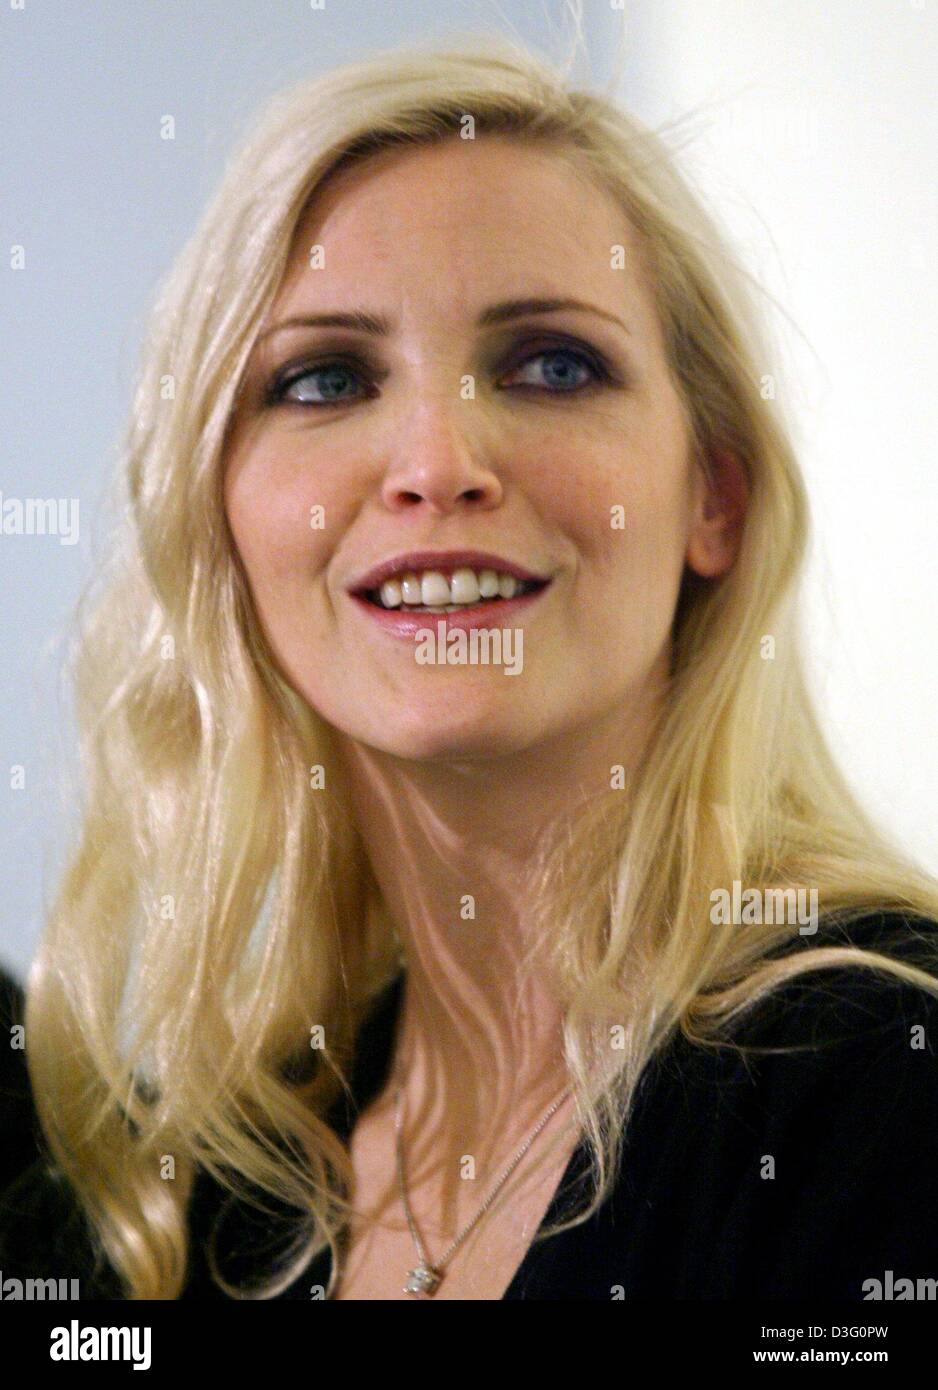 (dpa) - German top model Nadja Auermann pictured at the opening of the Lindbergh exhibition 'Stories - Supermodels' in Oberhausen, Germany, 13 February 2003. The exhibition of photographs is open from 14 February until 11 May 2003. Centre of the exhibition is the series 'Invasion' which consists of 24 scurrile fashion photographs. Stock Photo